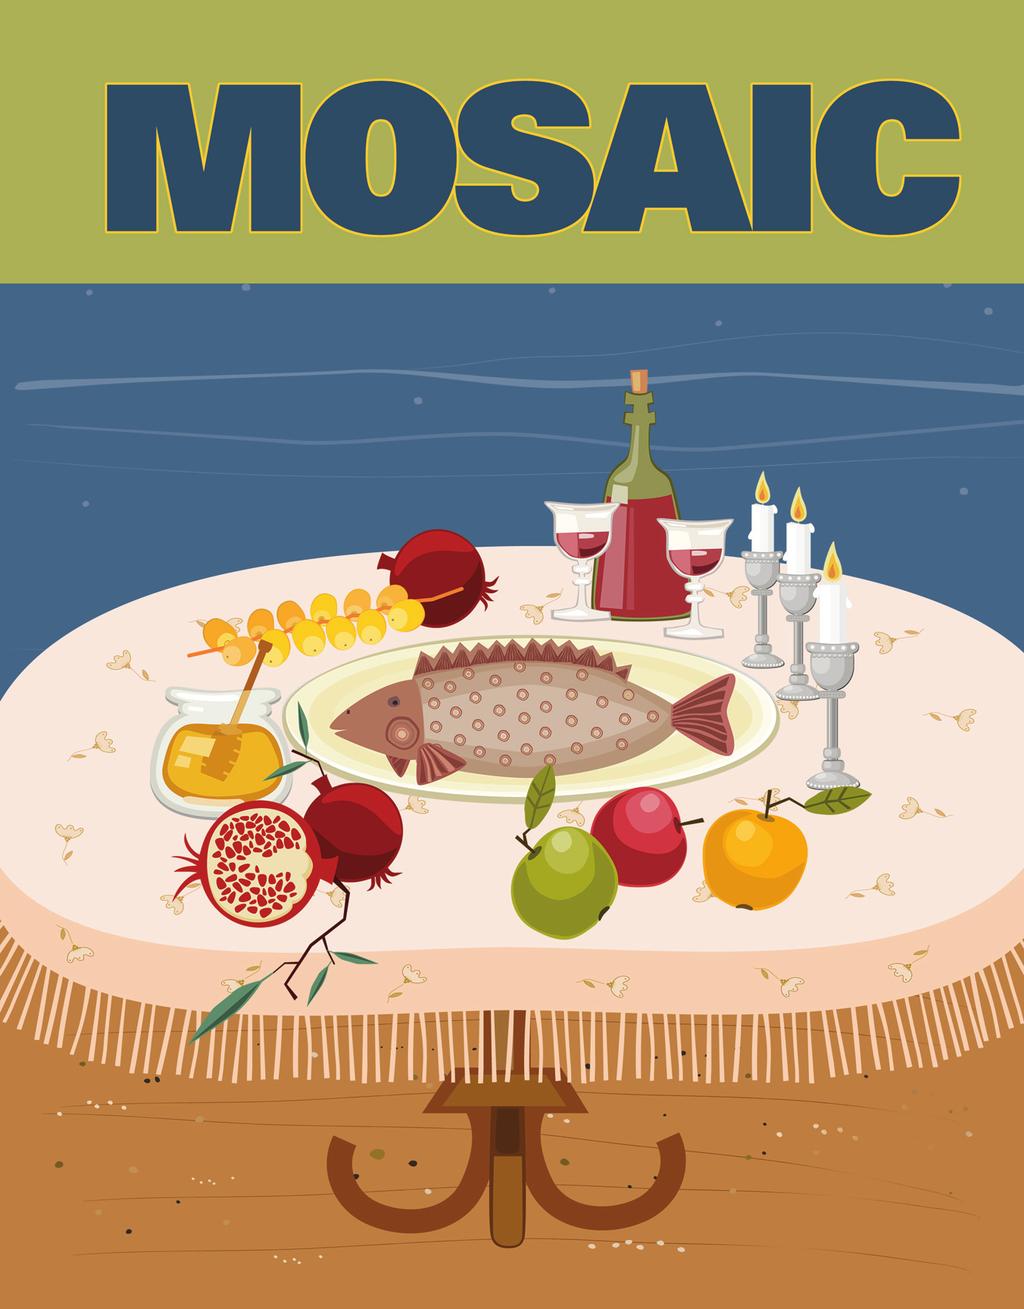 FALL 5774-2013 MTC has great pleasure in presenting the MOSAIC s High Holiday Guide for your enjoyment.